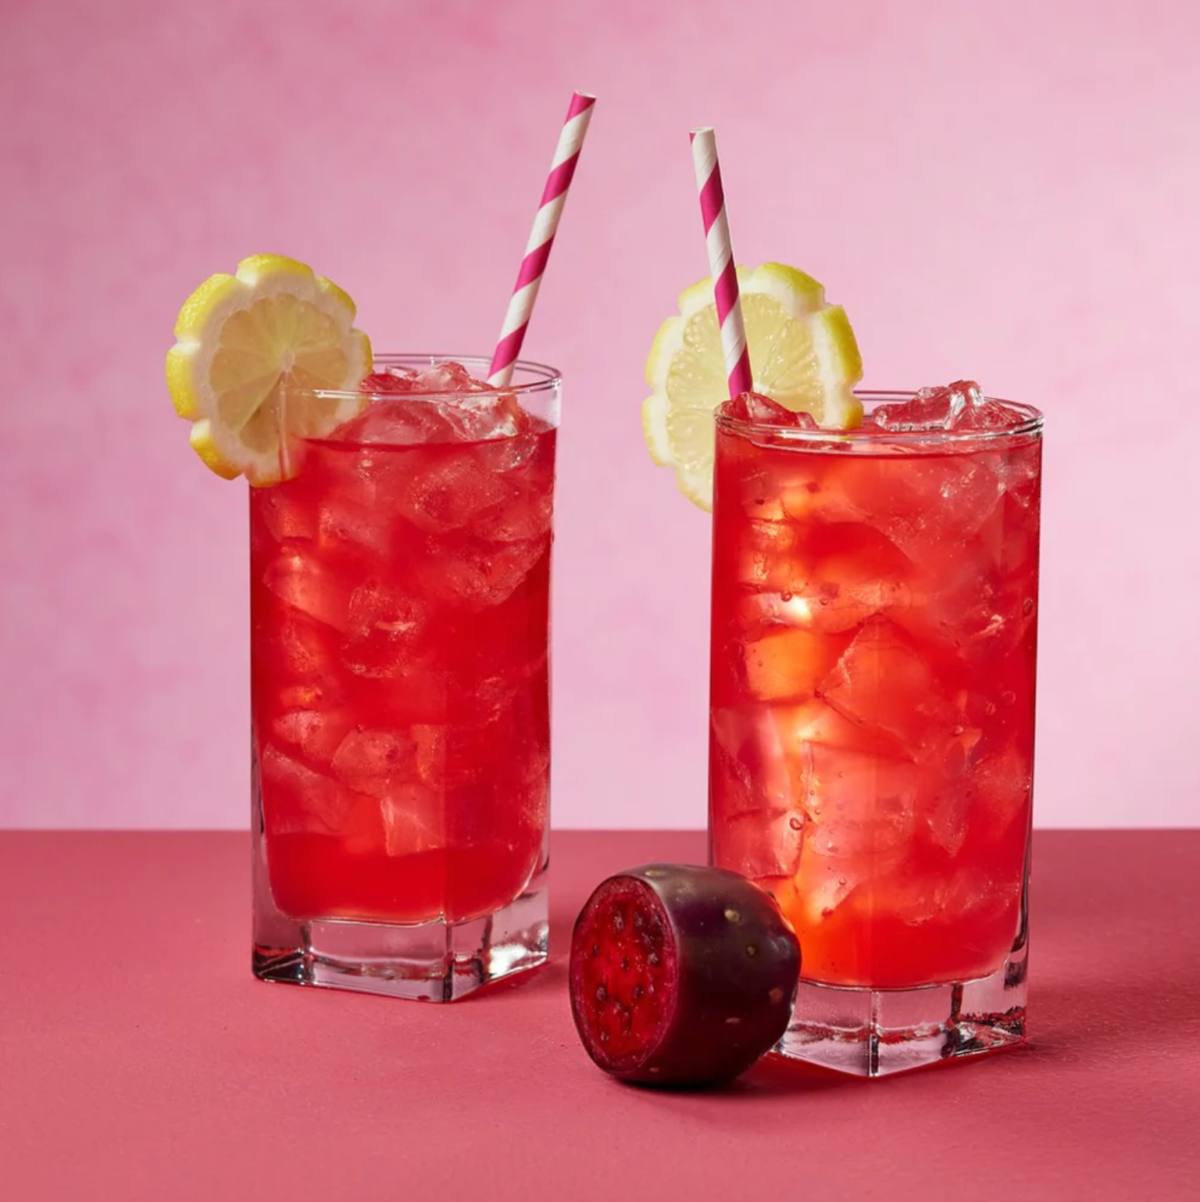 Two tall glasses of Prickly Pear Lemonade with a sliced prickly pear between them.